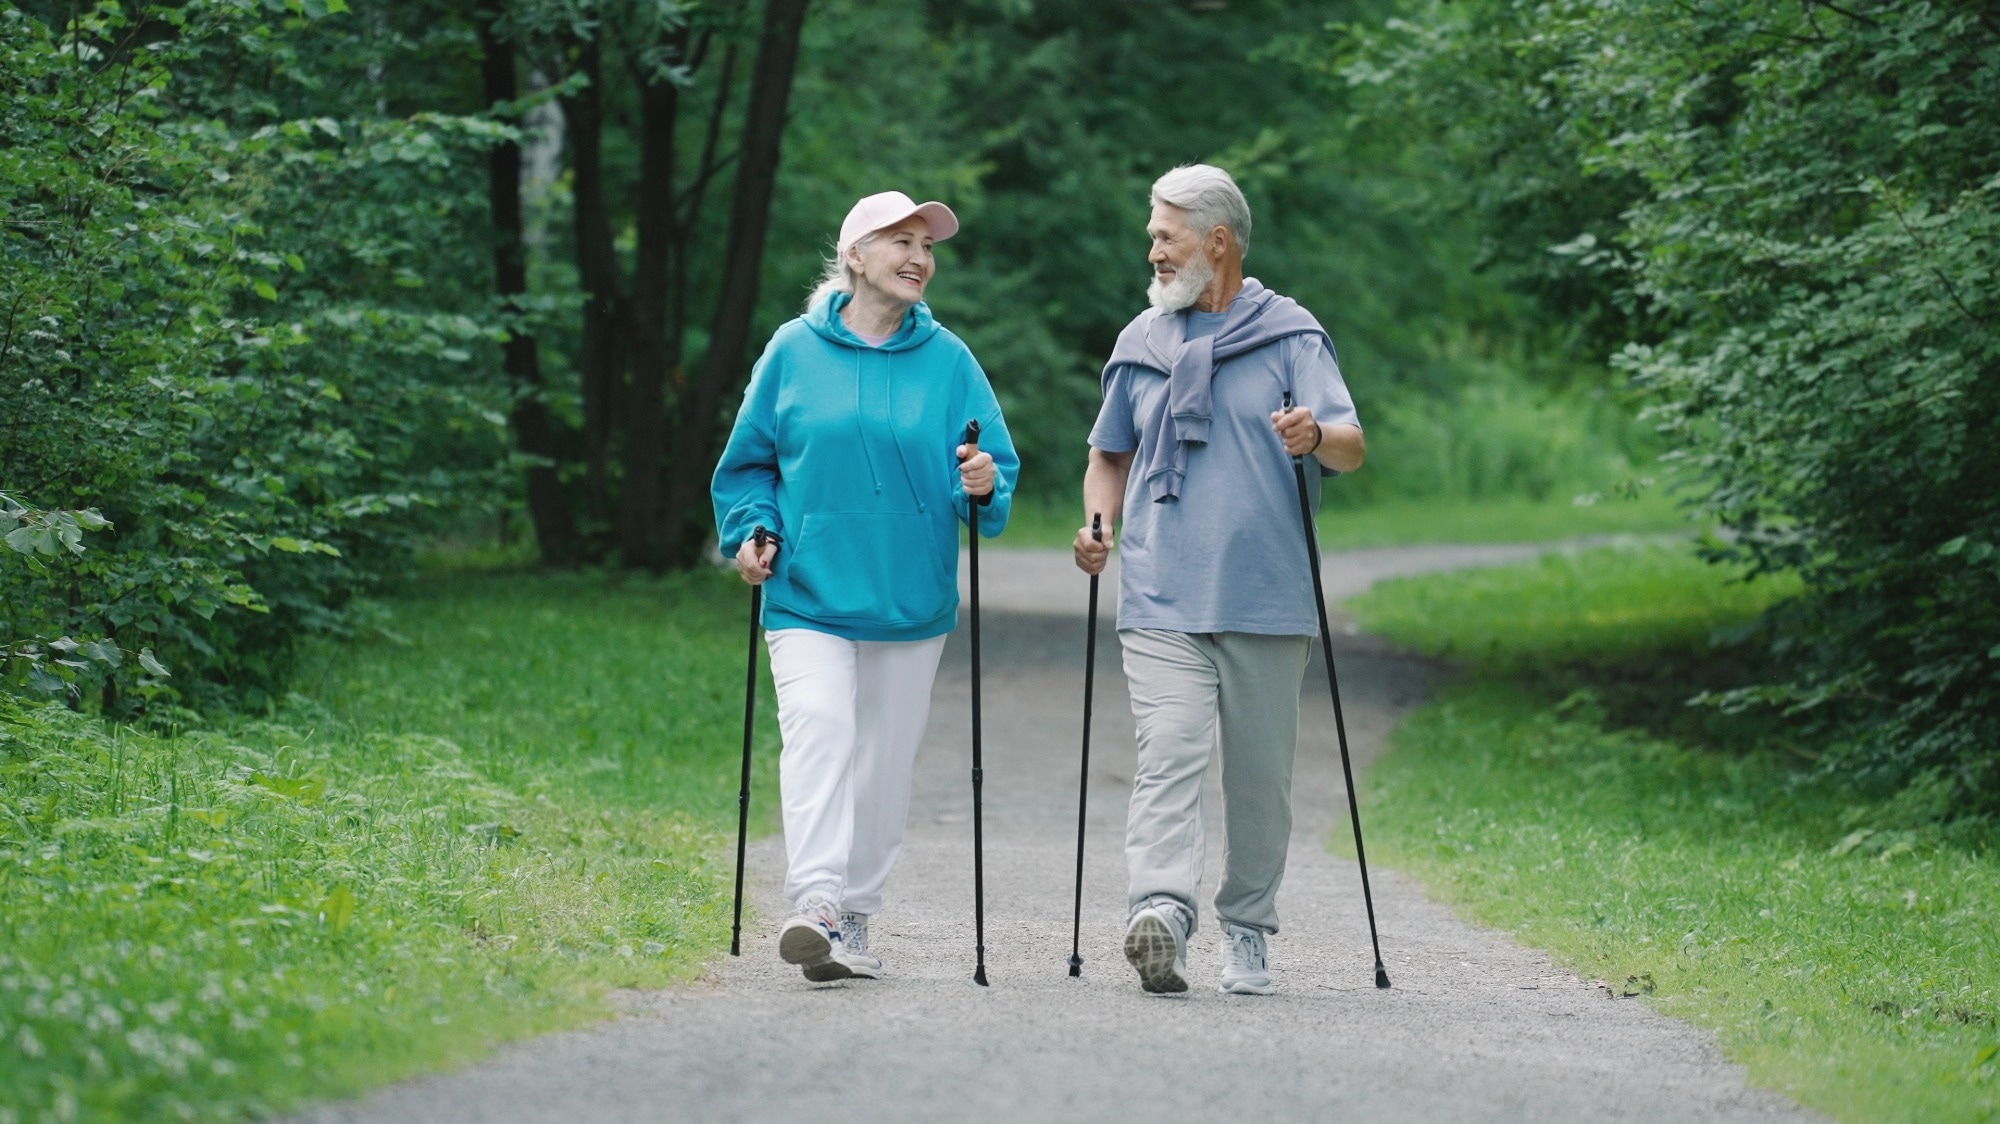 Step steady: Consistent walking improves brain function in older adults